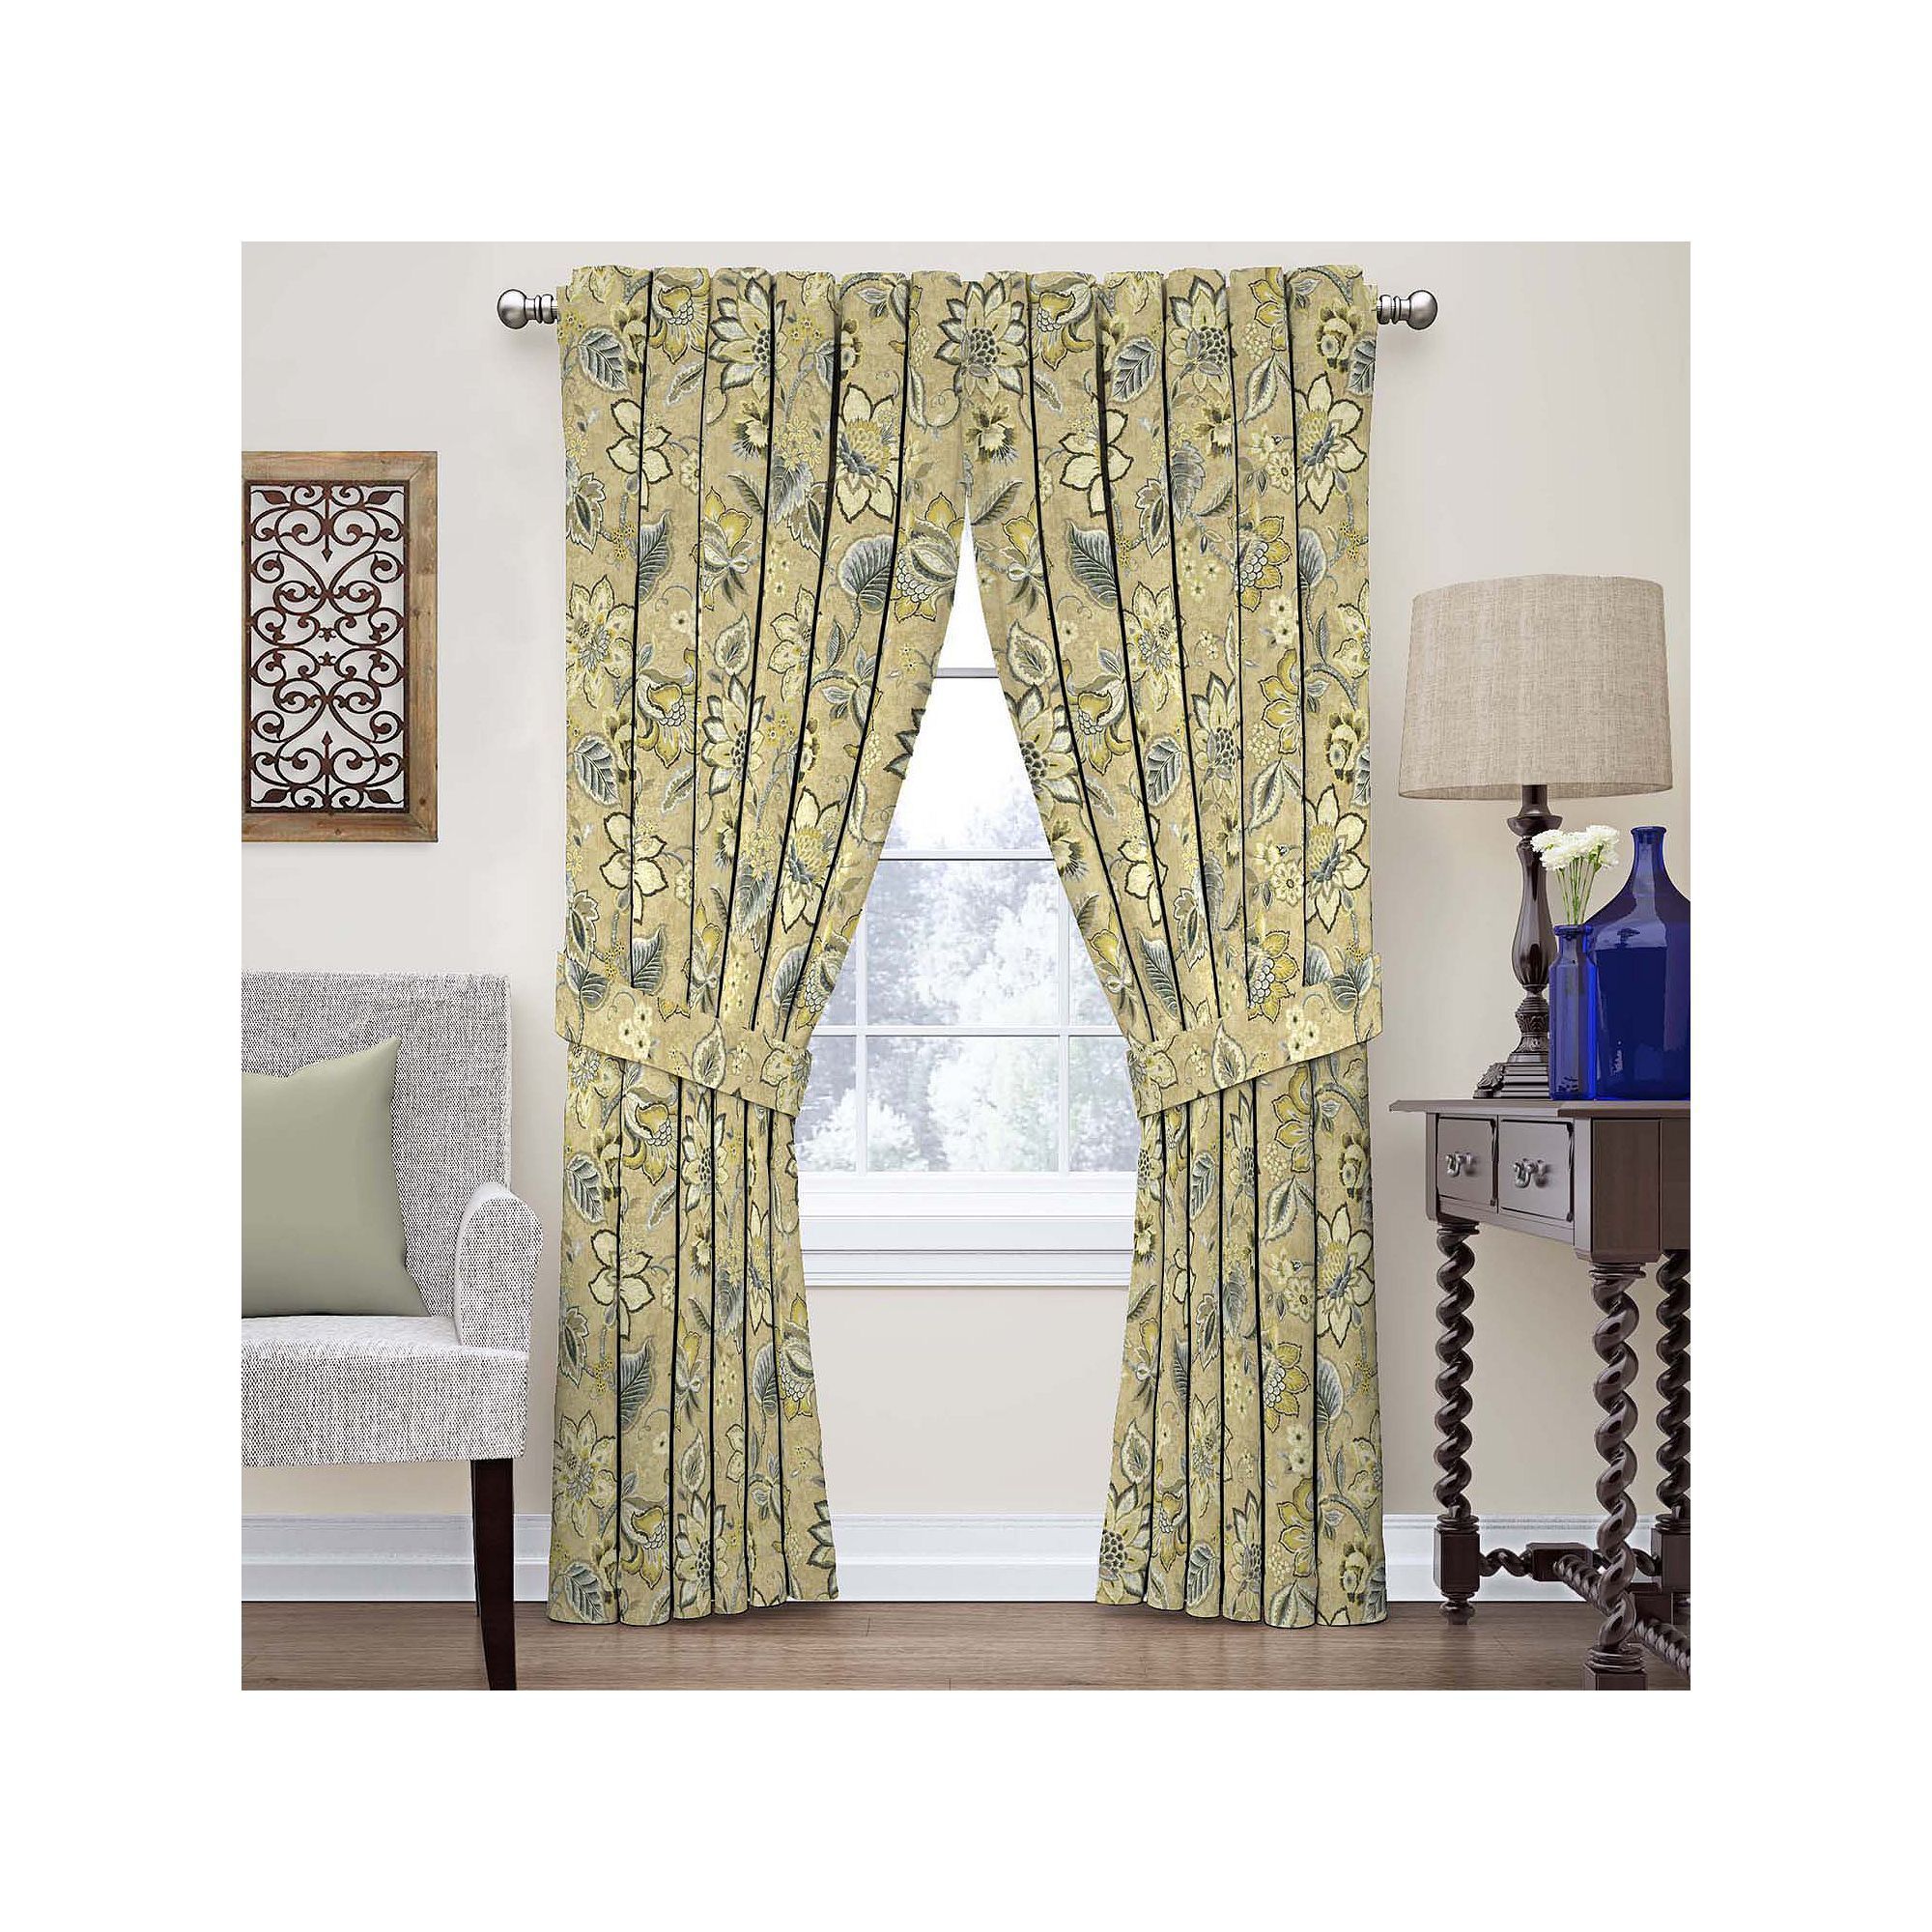 Waverly 1 Panel Brighton Blossom Floral Window Curtain With Floral Watercolor Semi Sheer Rod Pocket Kitchen Curtain Valance And Tiers Sets (Photo 16 of 20)